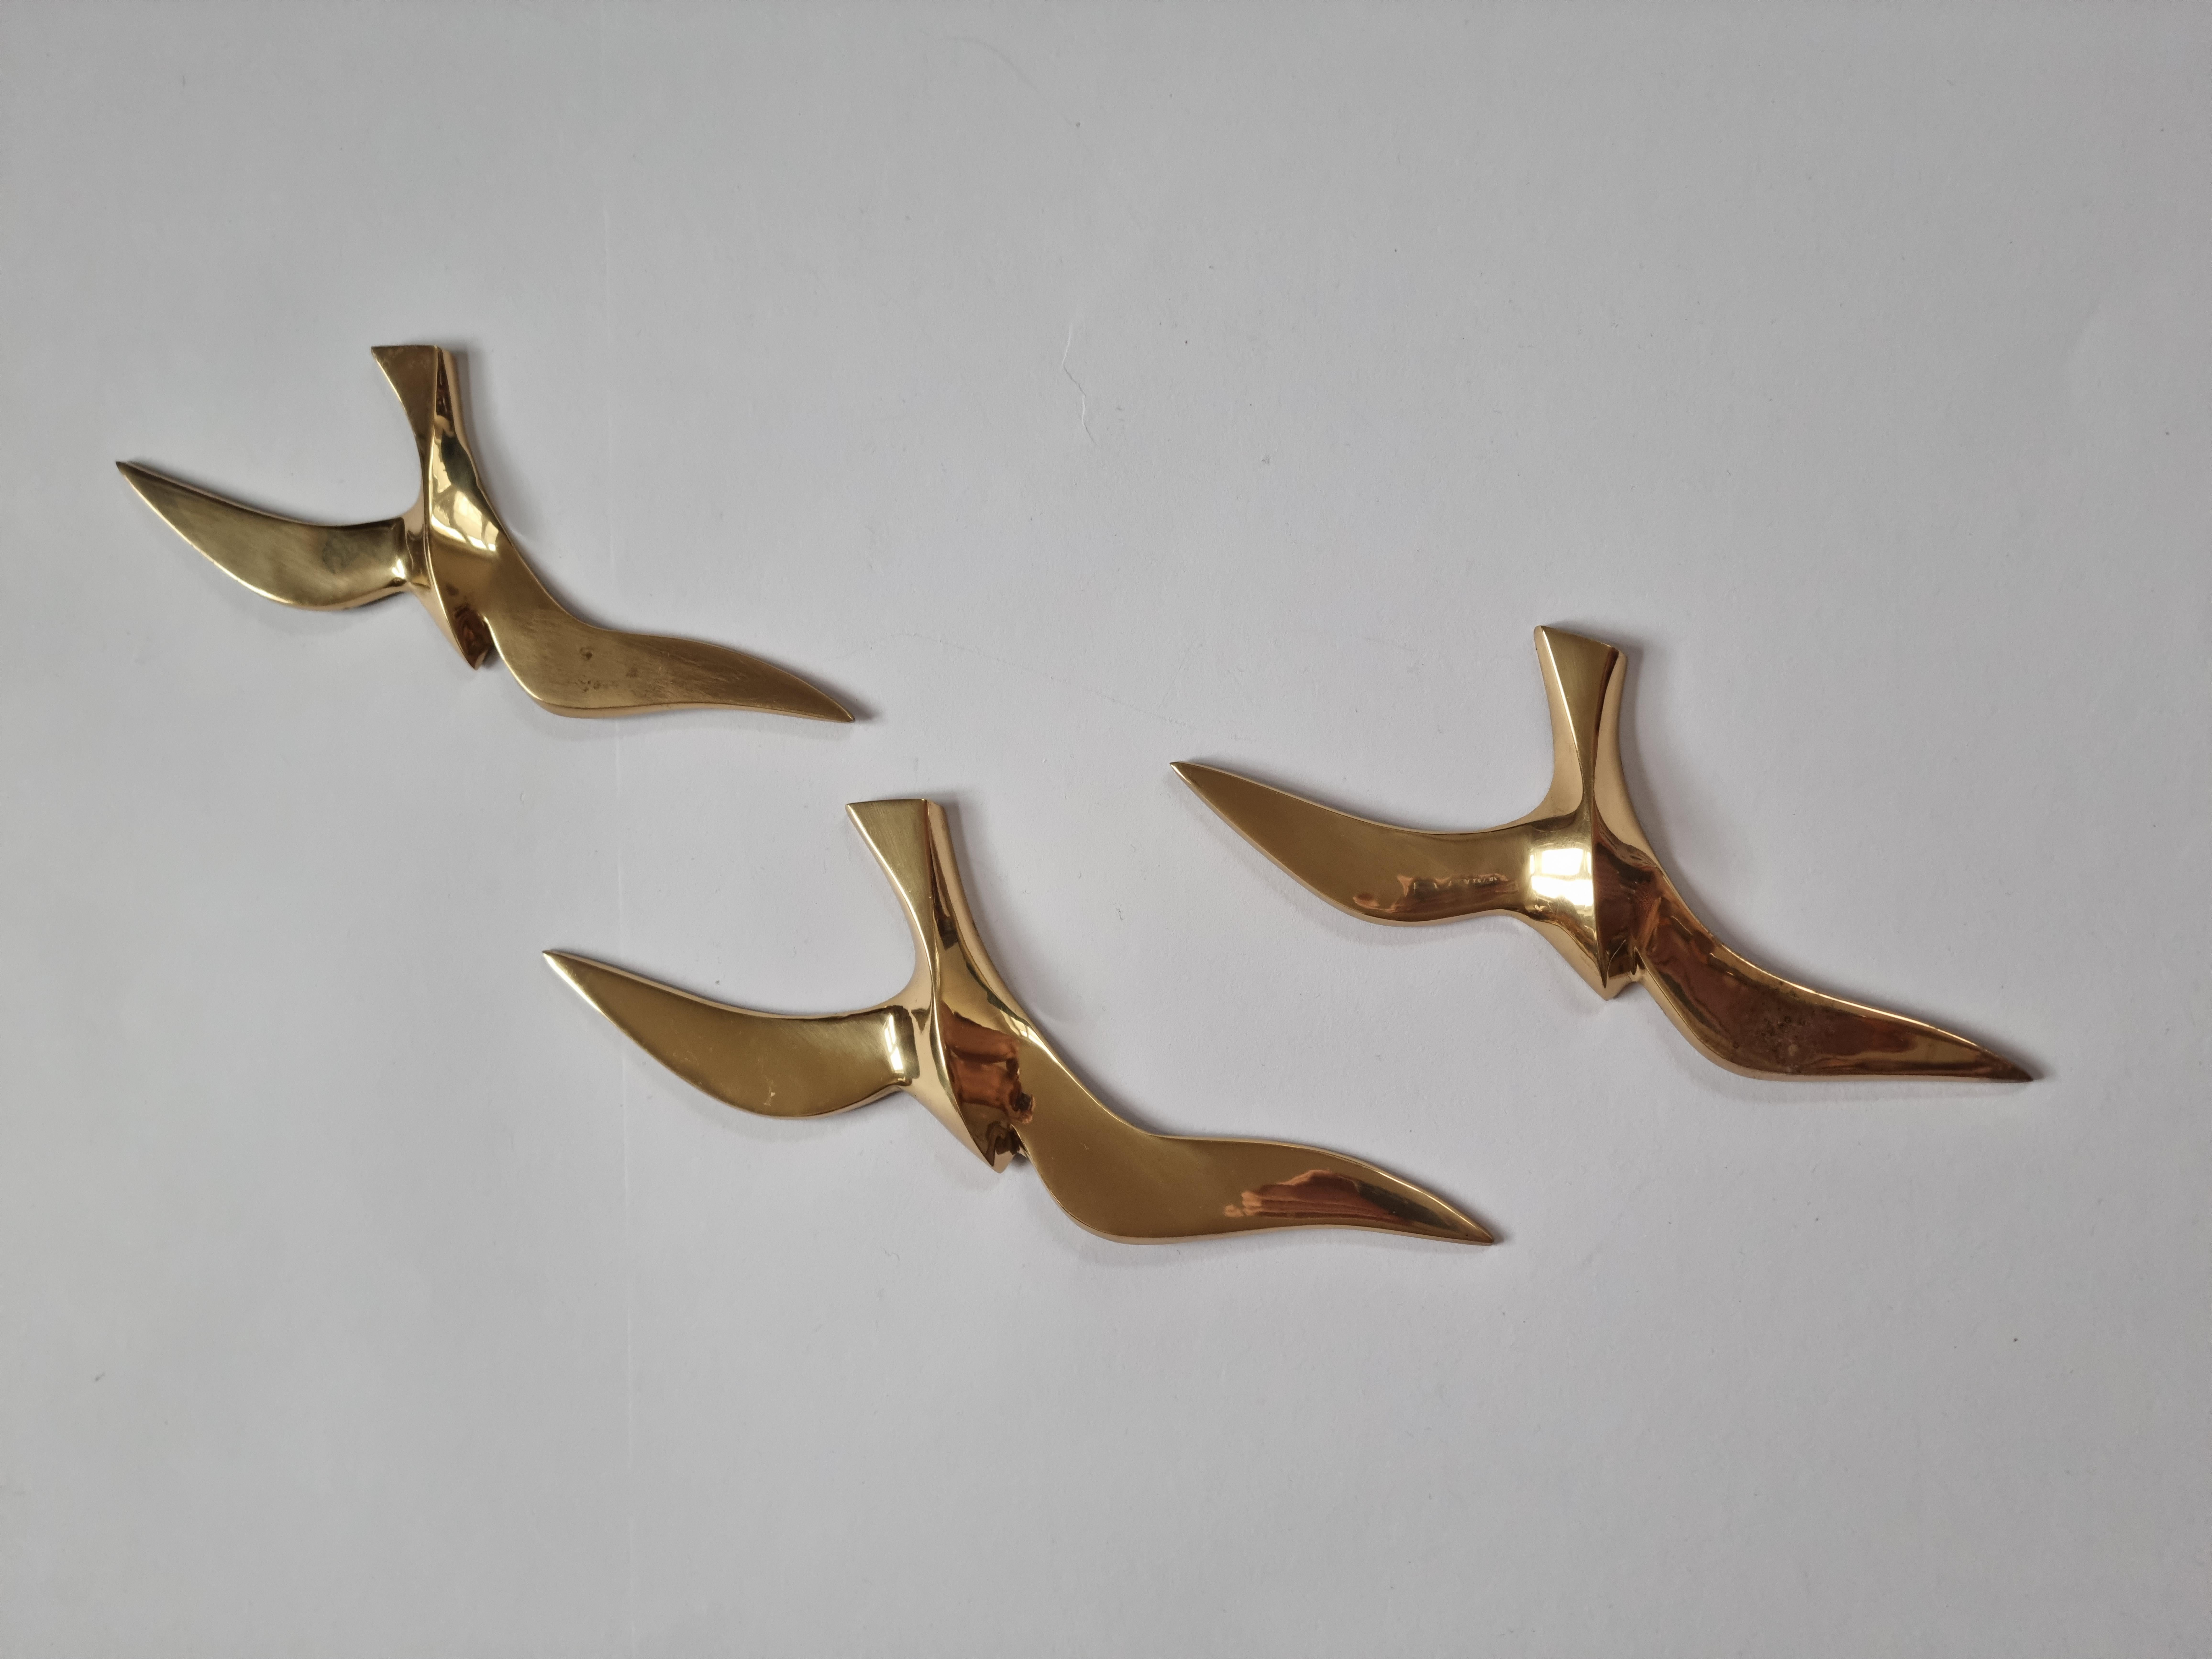 Set of Three Wall Brass Decor Sculptures of Seagulls, Austria, 1960s For Sale 5